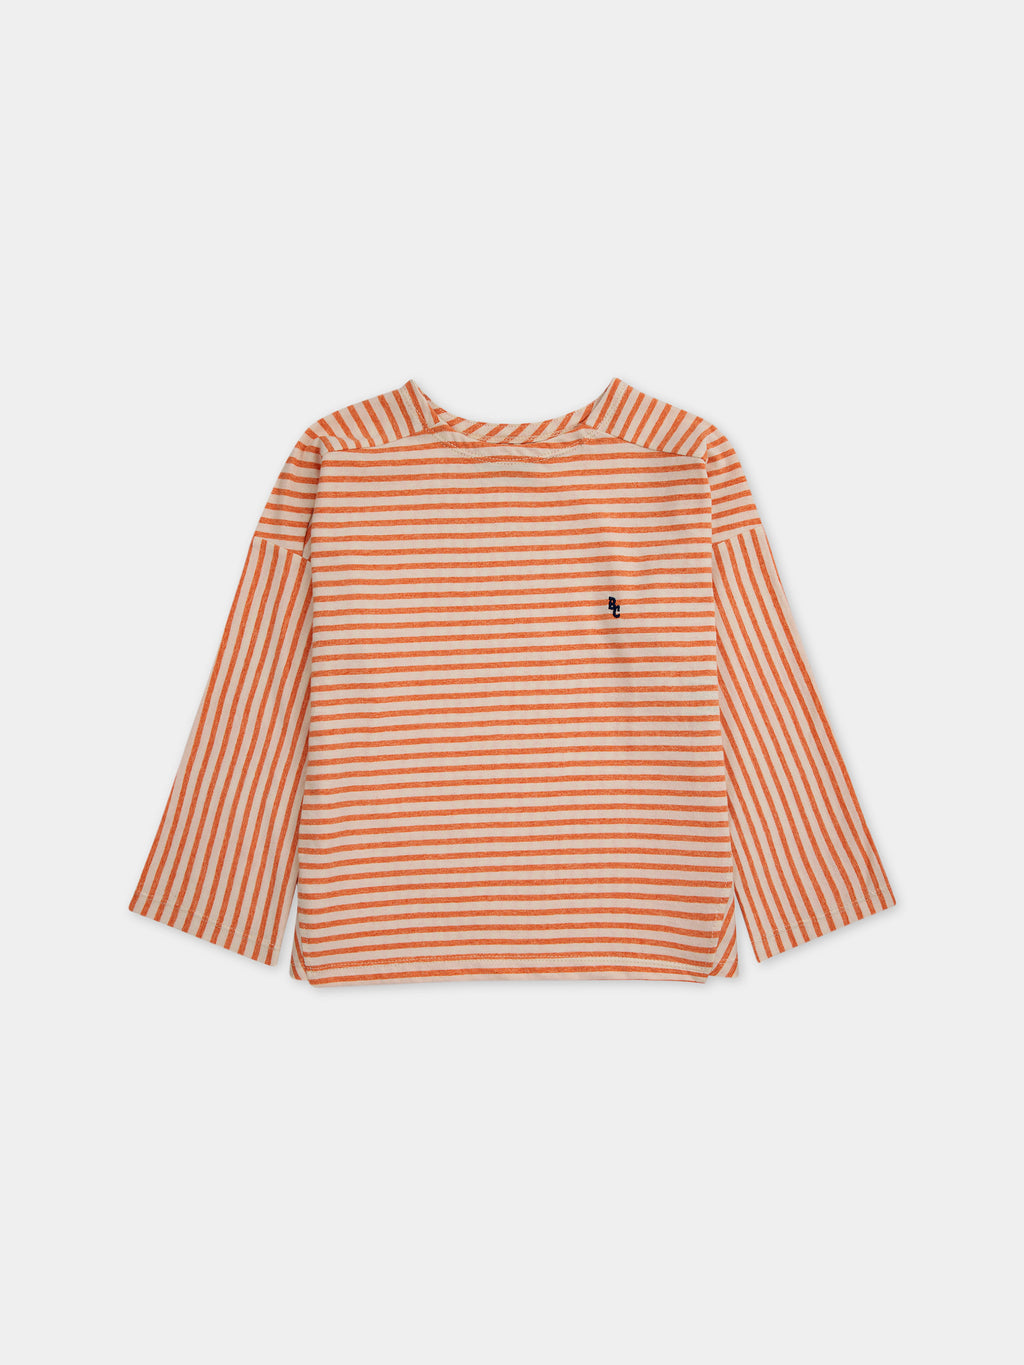 Orange t-shirt for kids with stripes